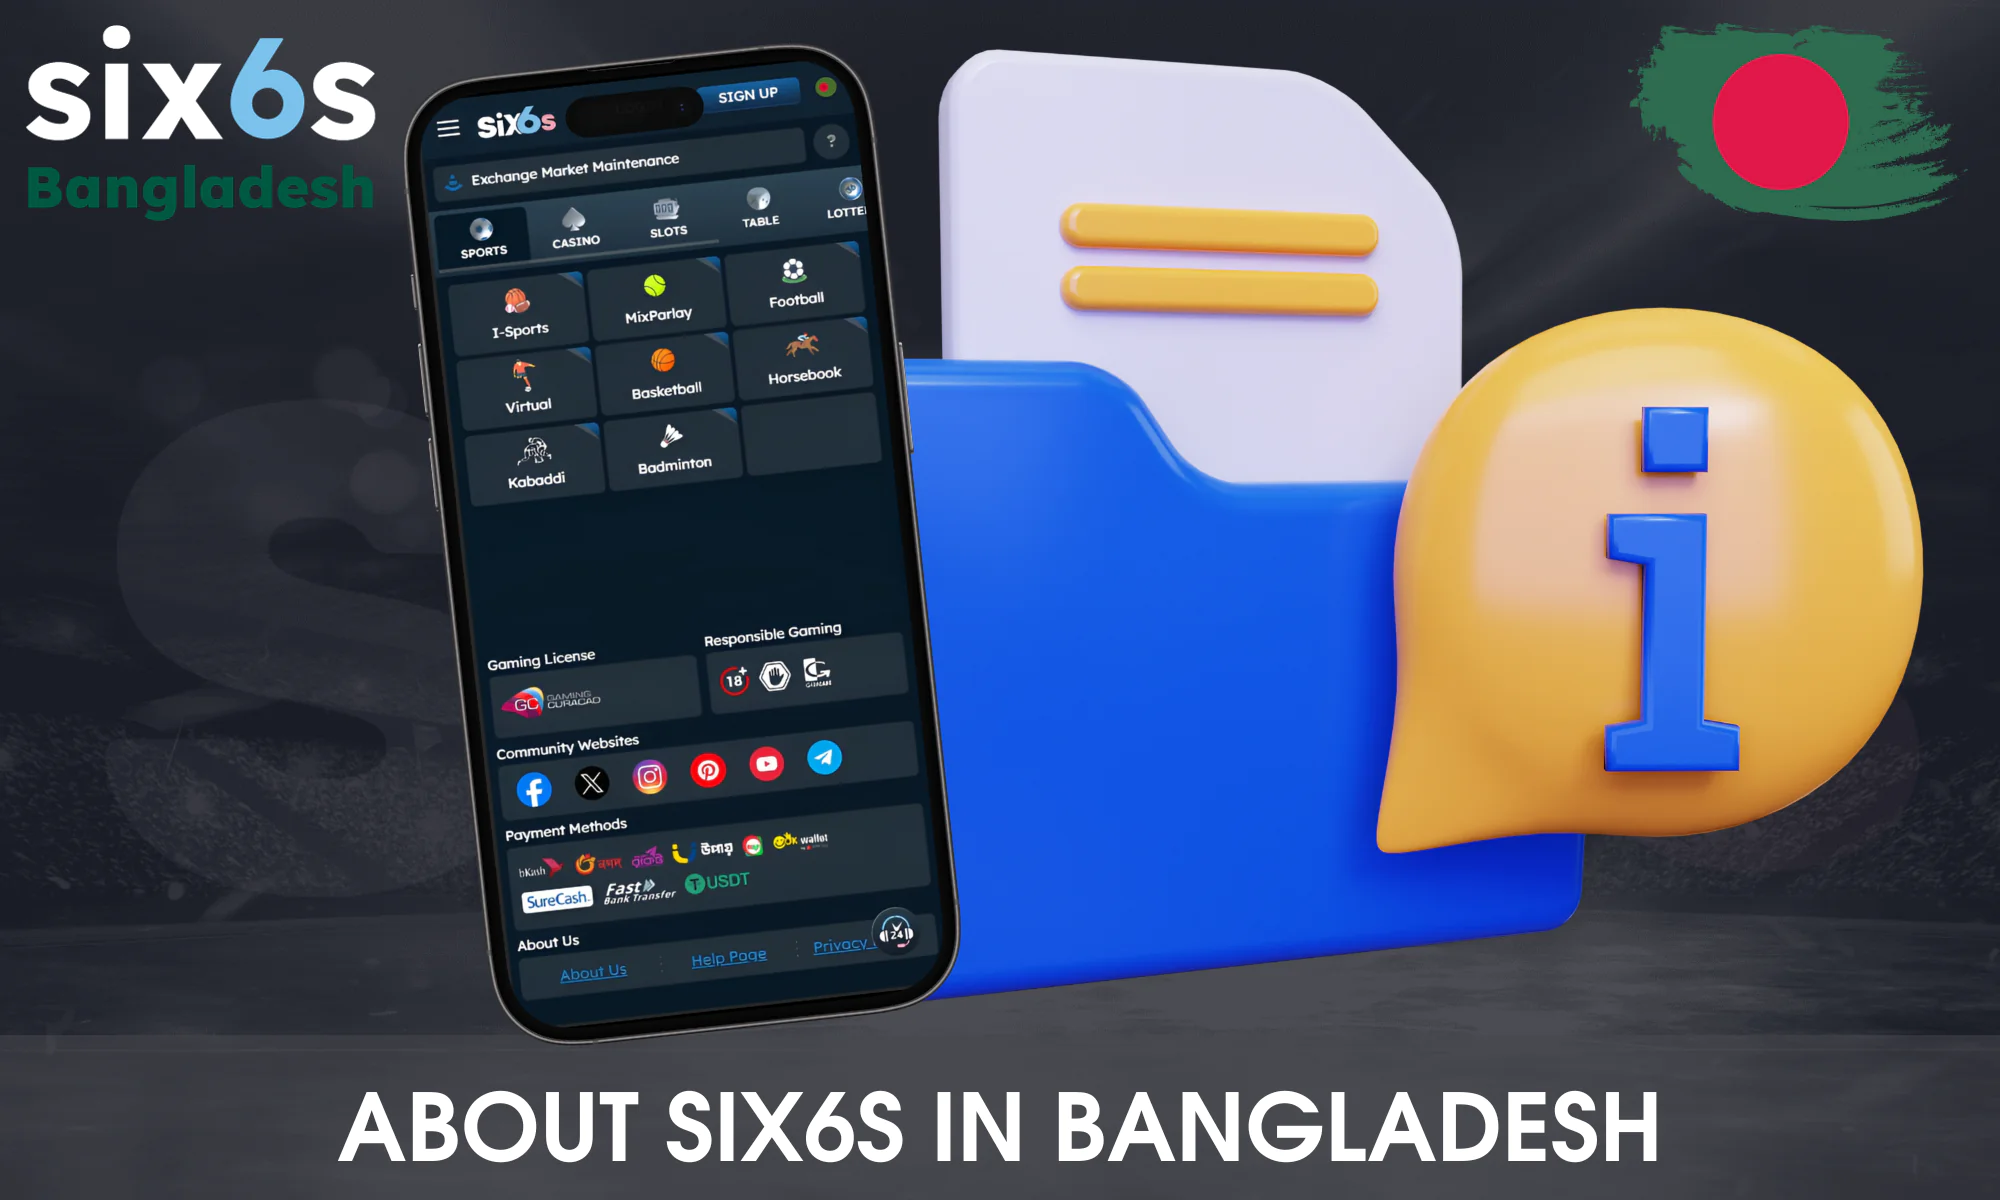 More information about Six6s in Baghnladesh